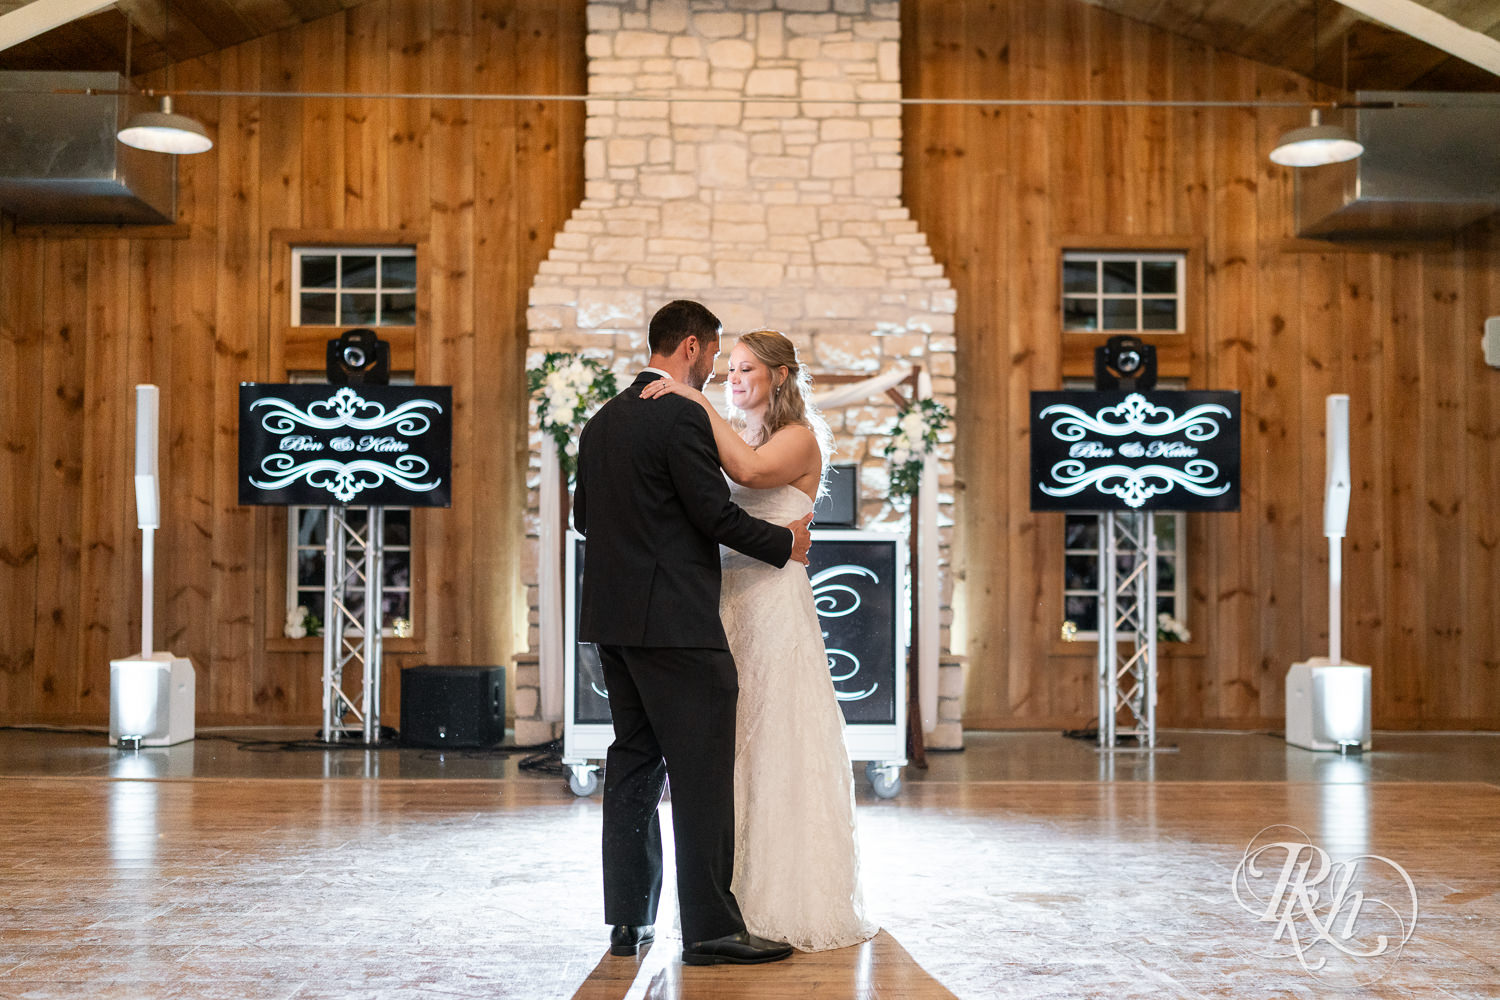 Bride and groom share first dance at wedding reception at Almquist Farm in Hastings, Minnesota.